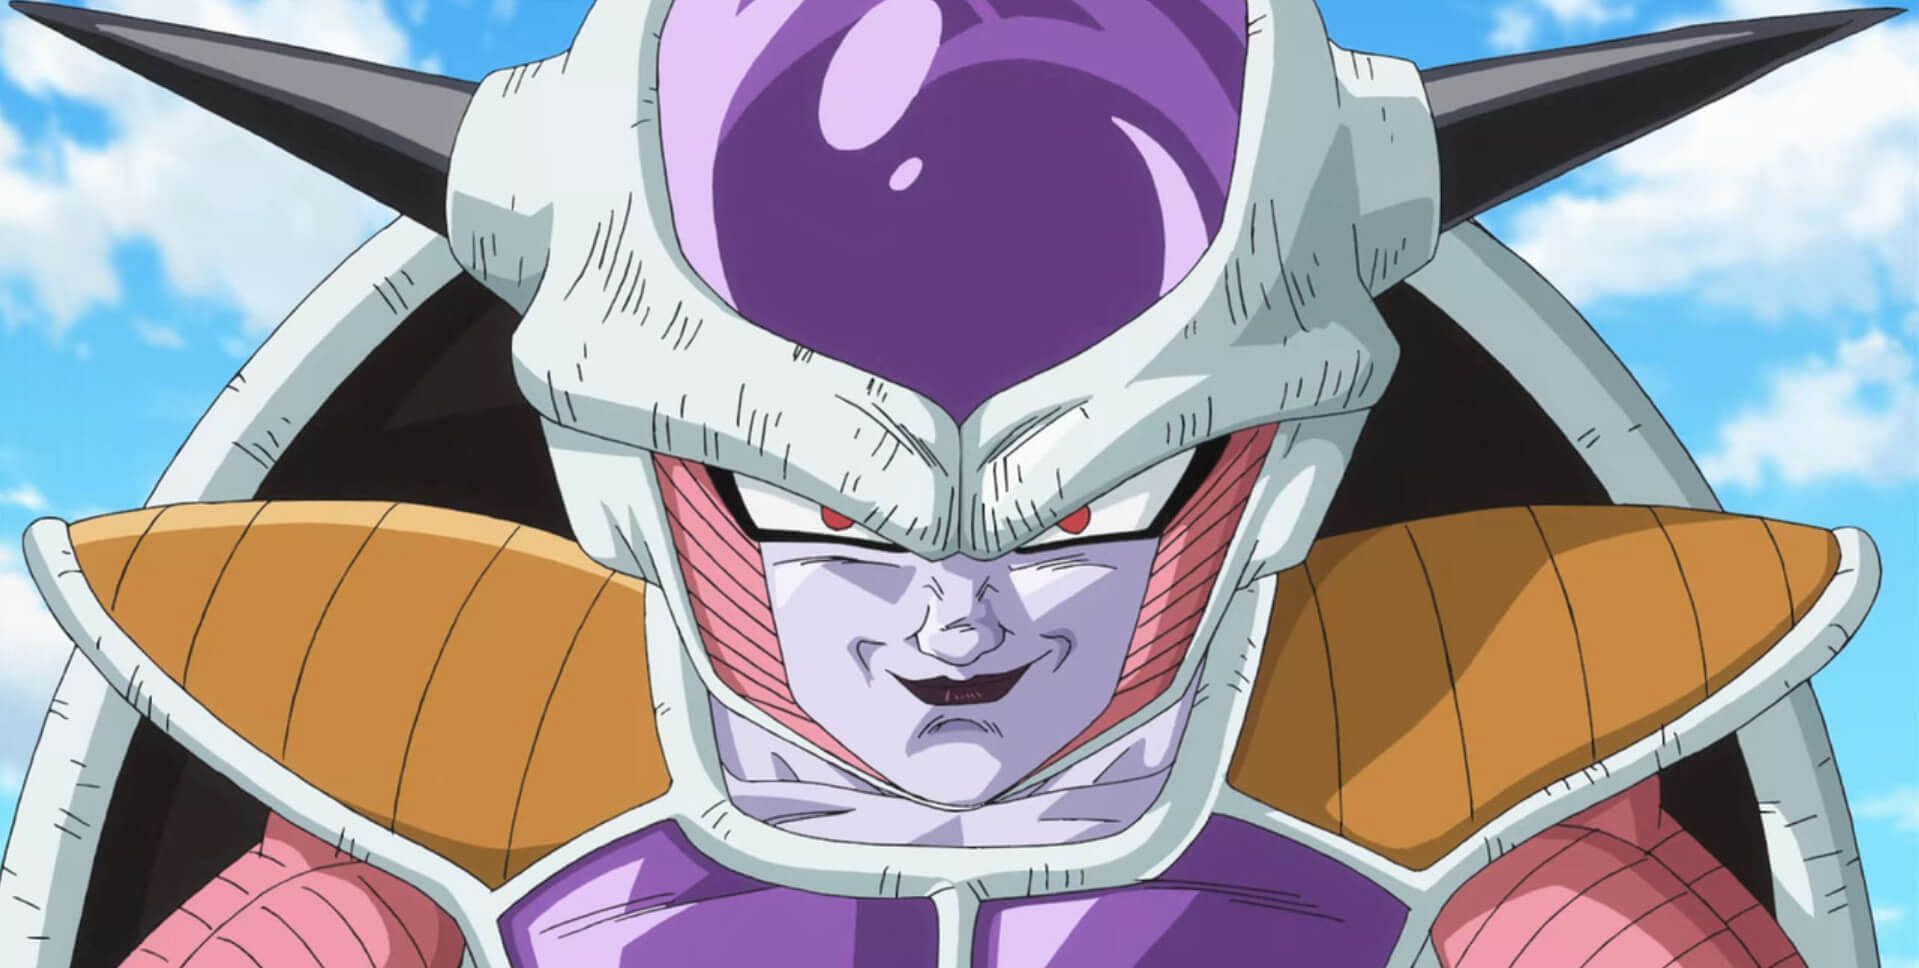 Frieza as seen in the DBZ anime (Image via Toei Animation)